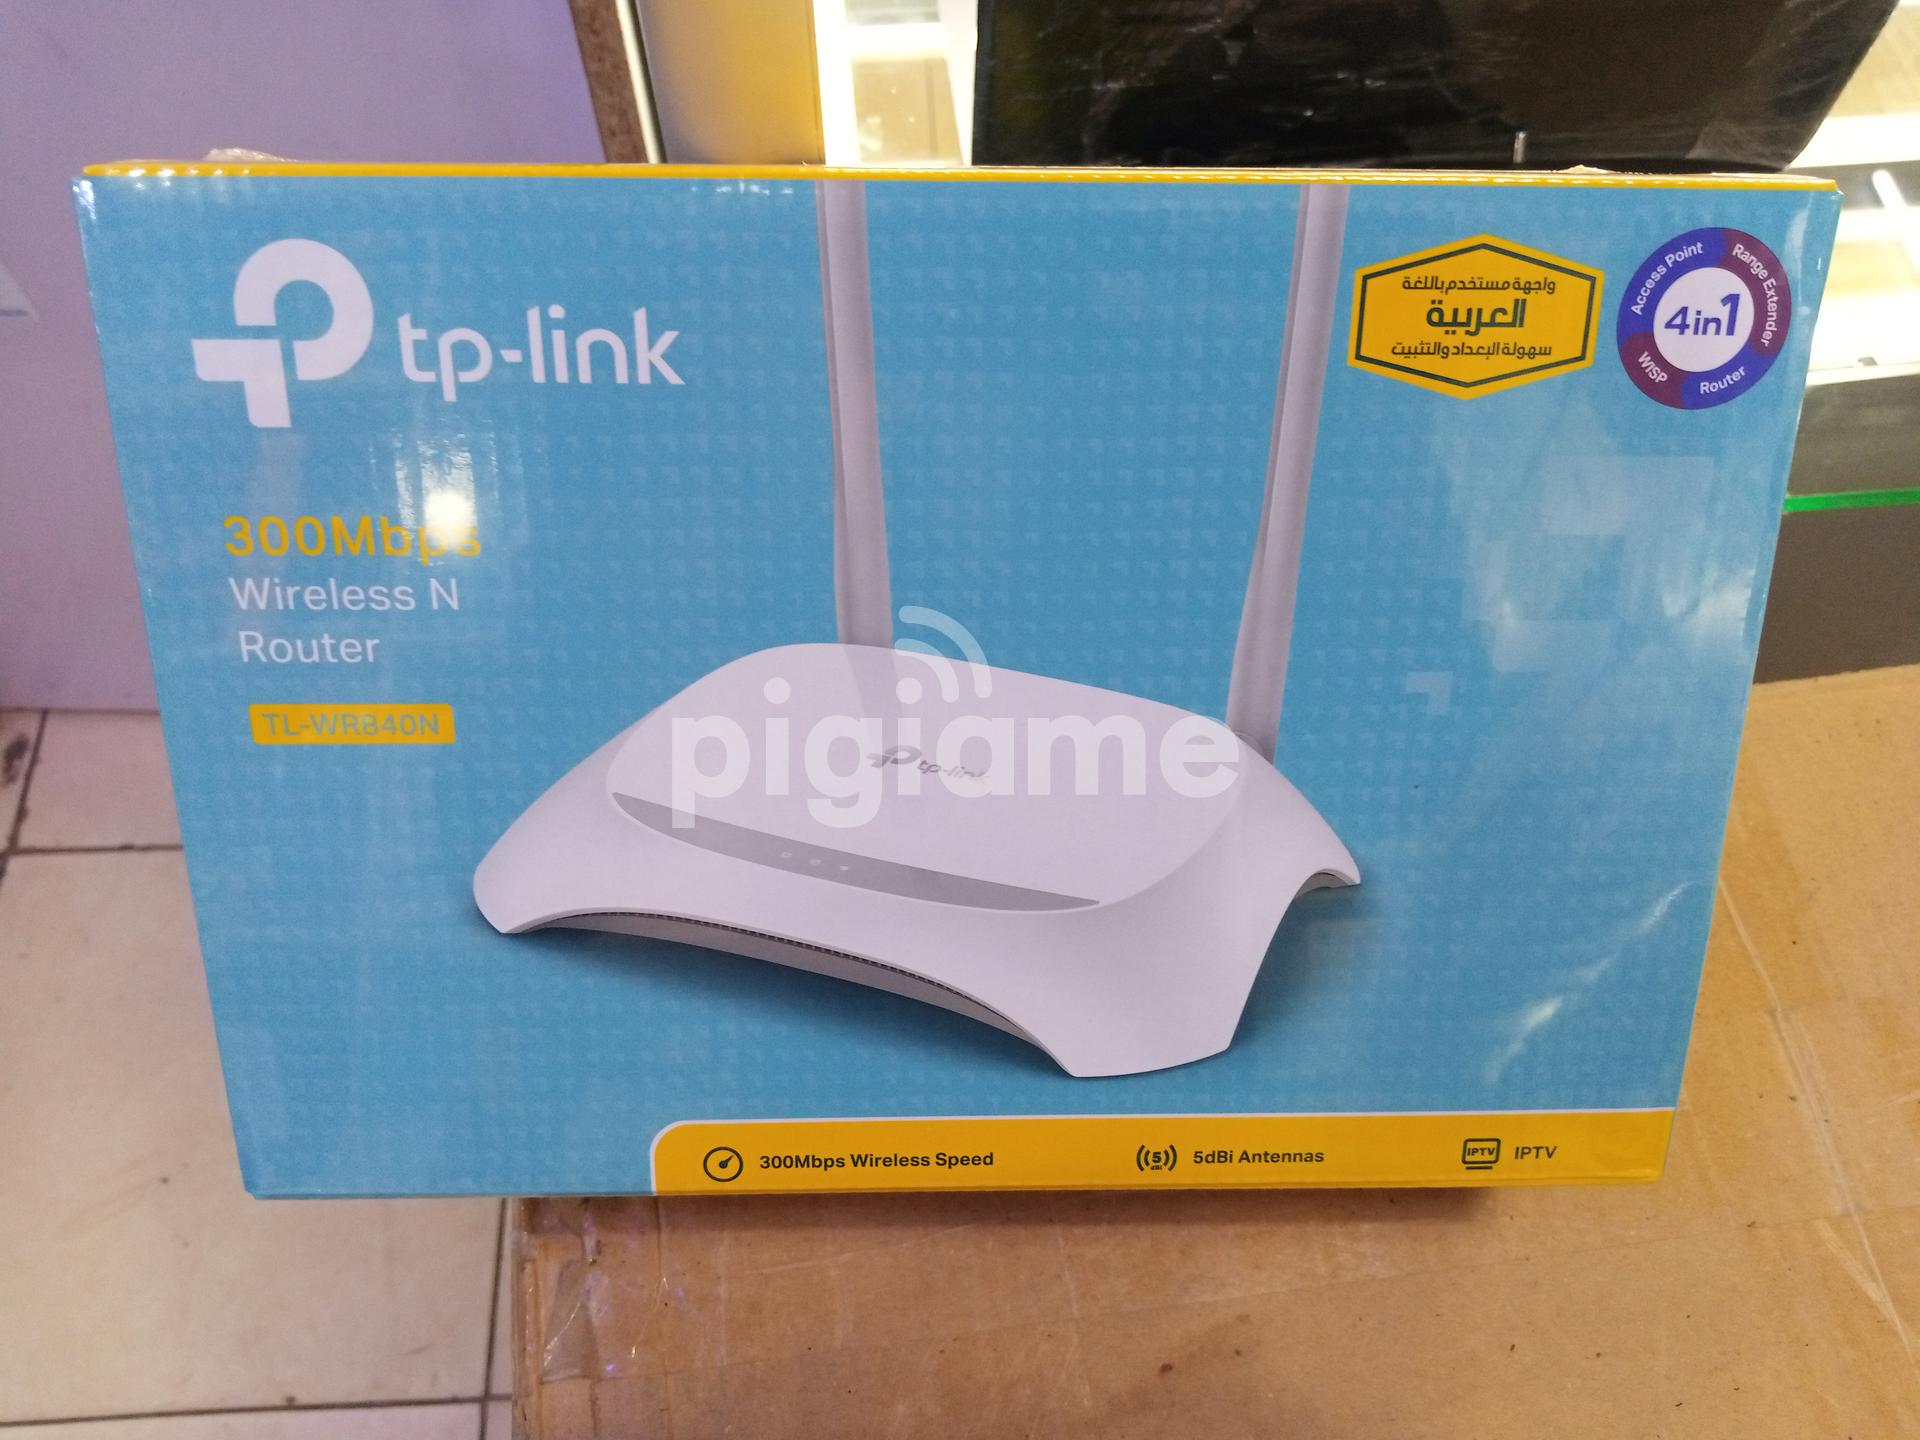 TP-Link Router TL-WR840N 300Mbps Wireless N Speed